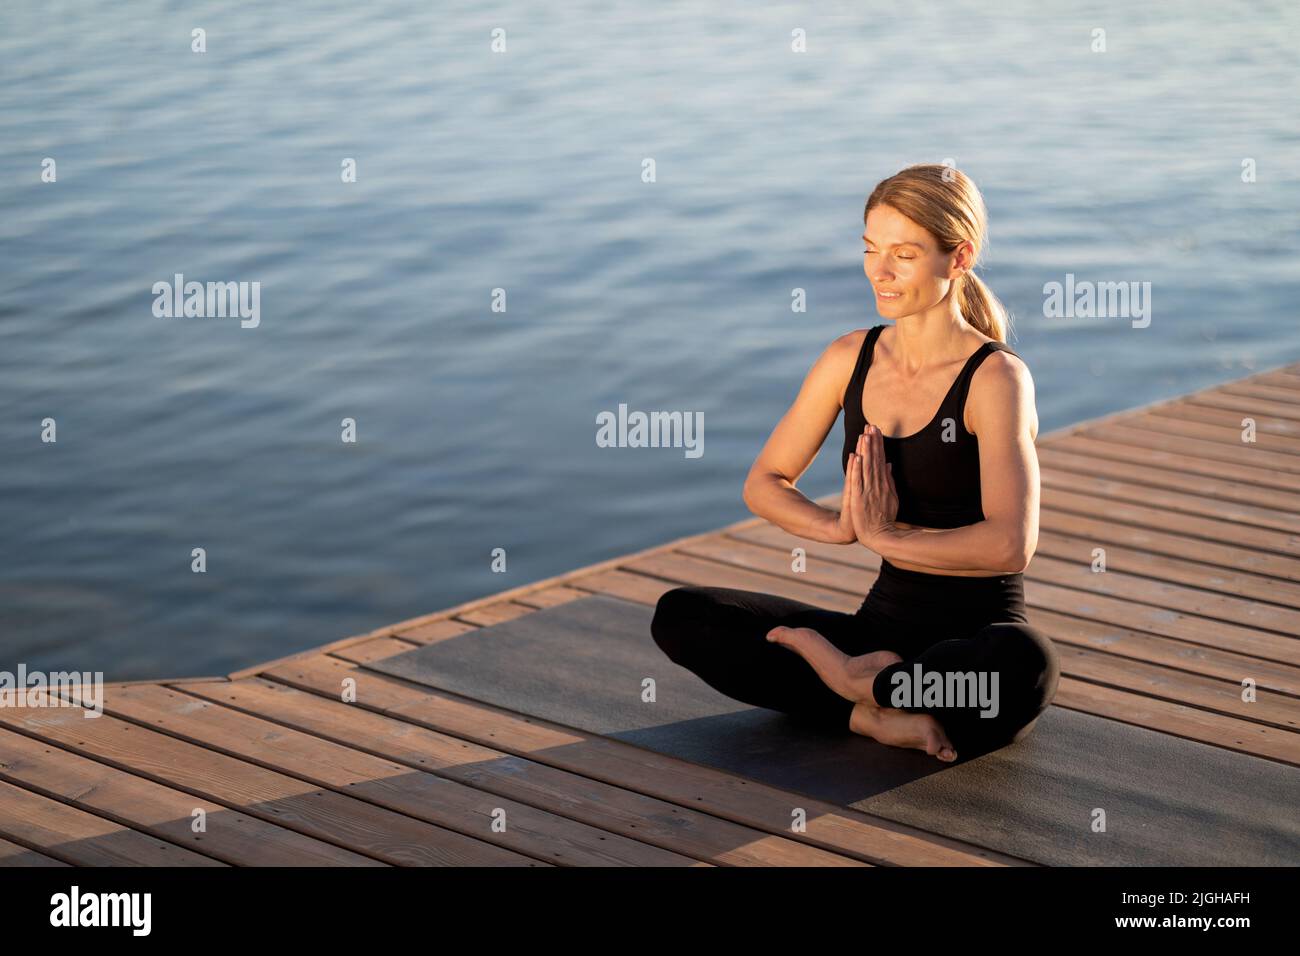 Morning Meditation. Calm Middle Aged Woman Meditating Outdoors On Wooden Pier Stock Photo